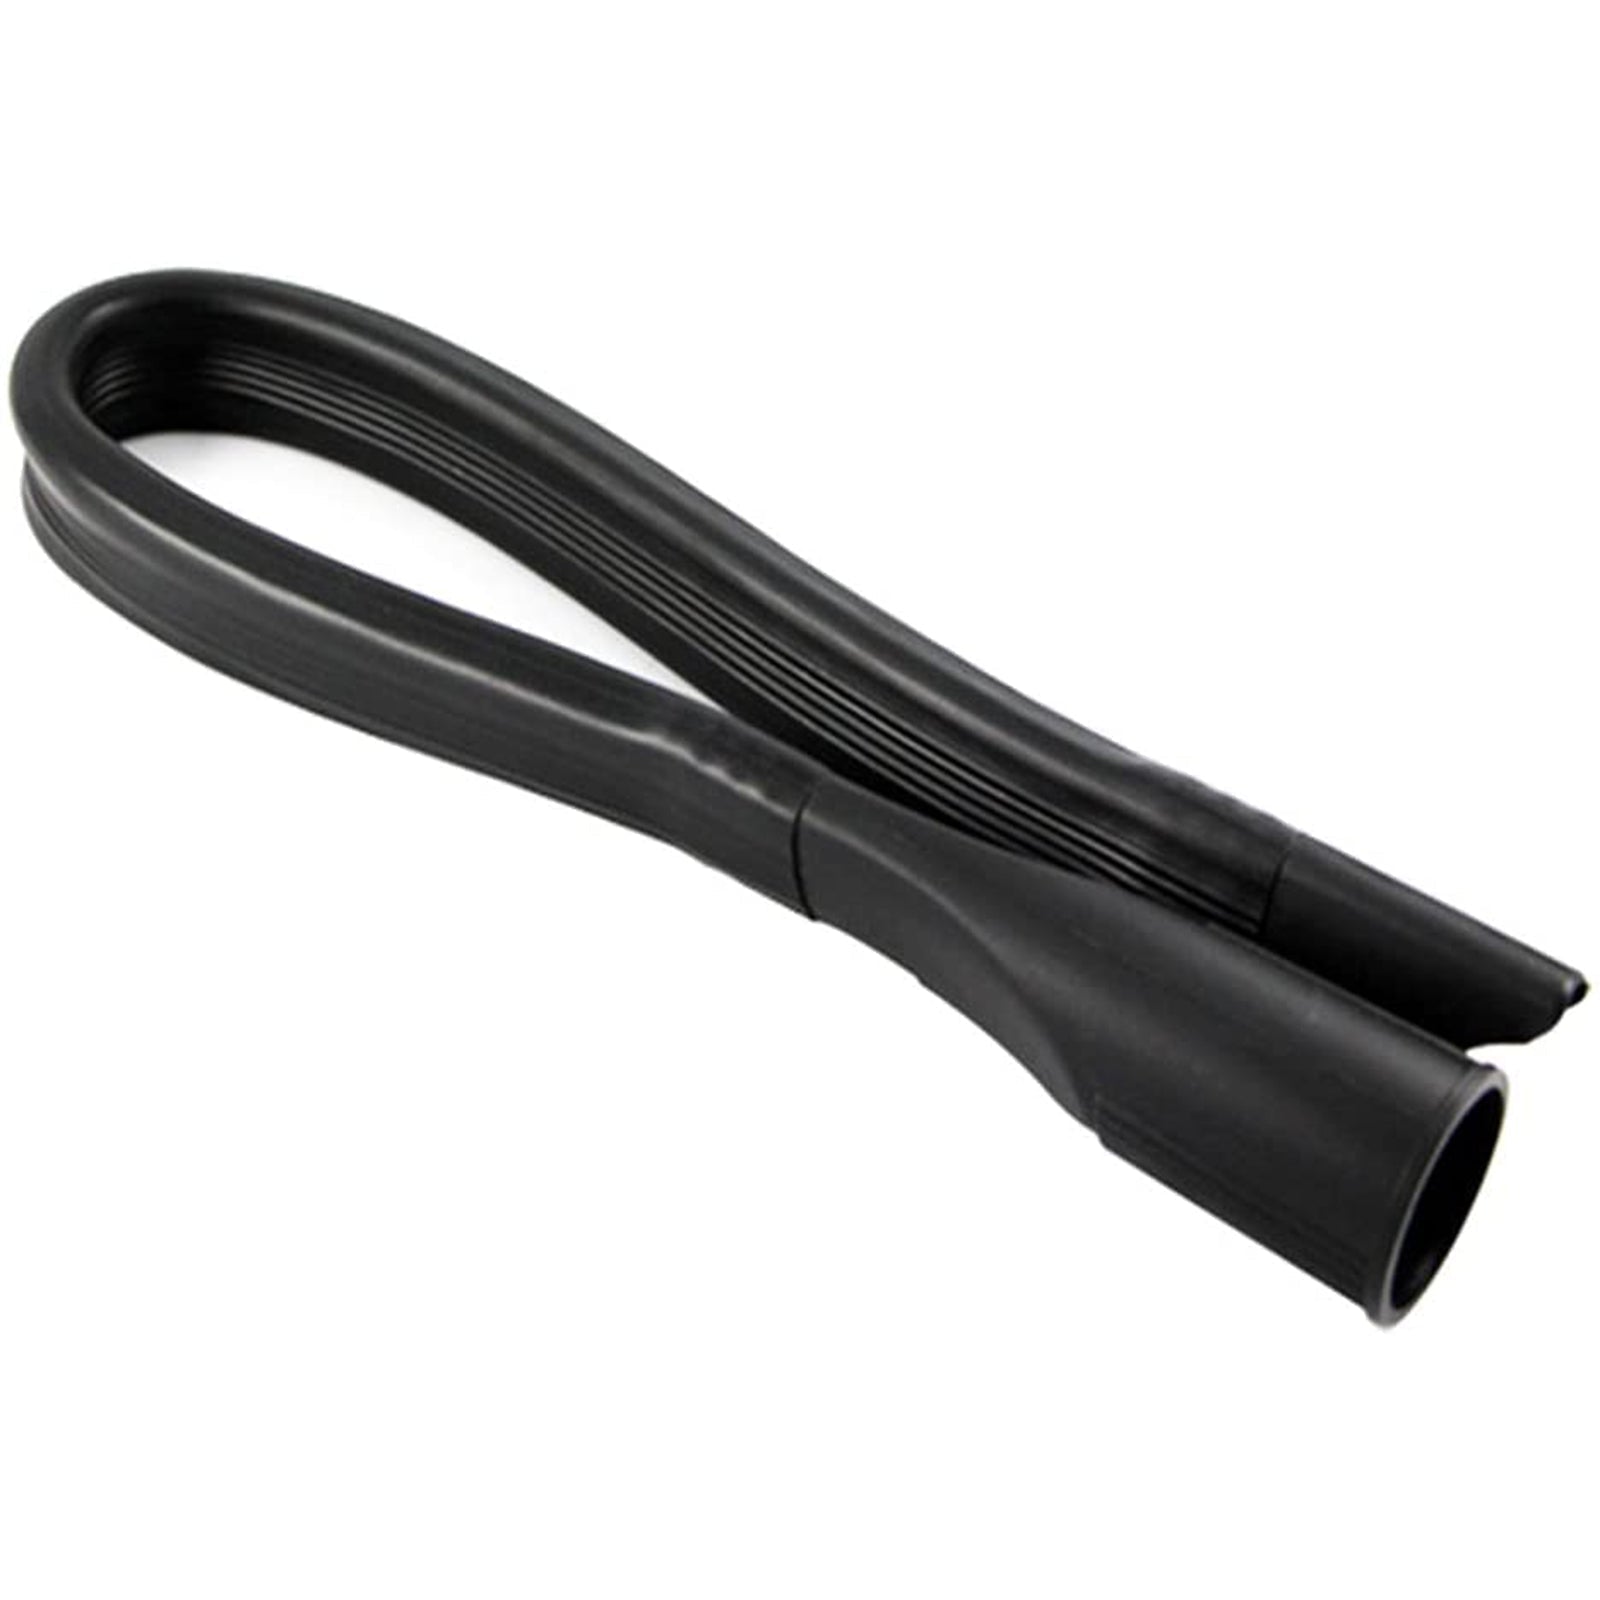 Flexible Crevice Tool Extra Long compatible with TESCO Vacuum Cleaner (32mm)